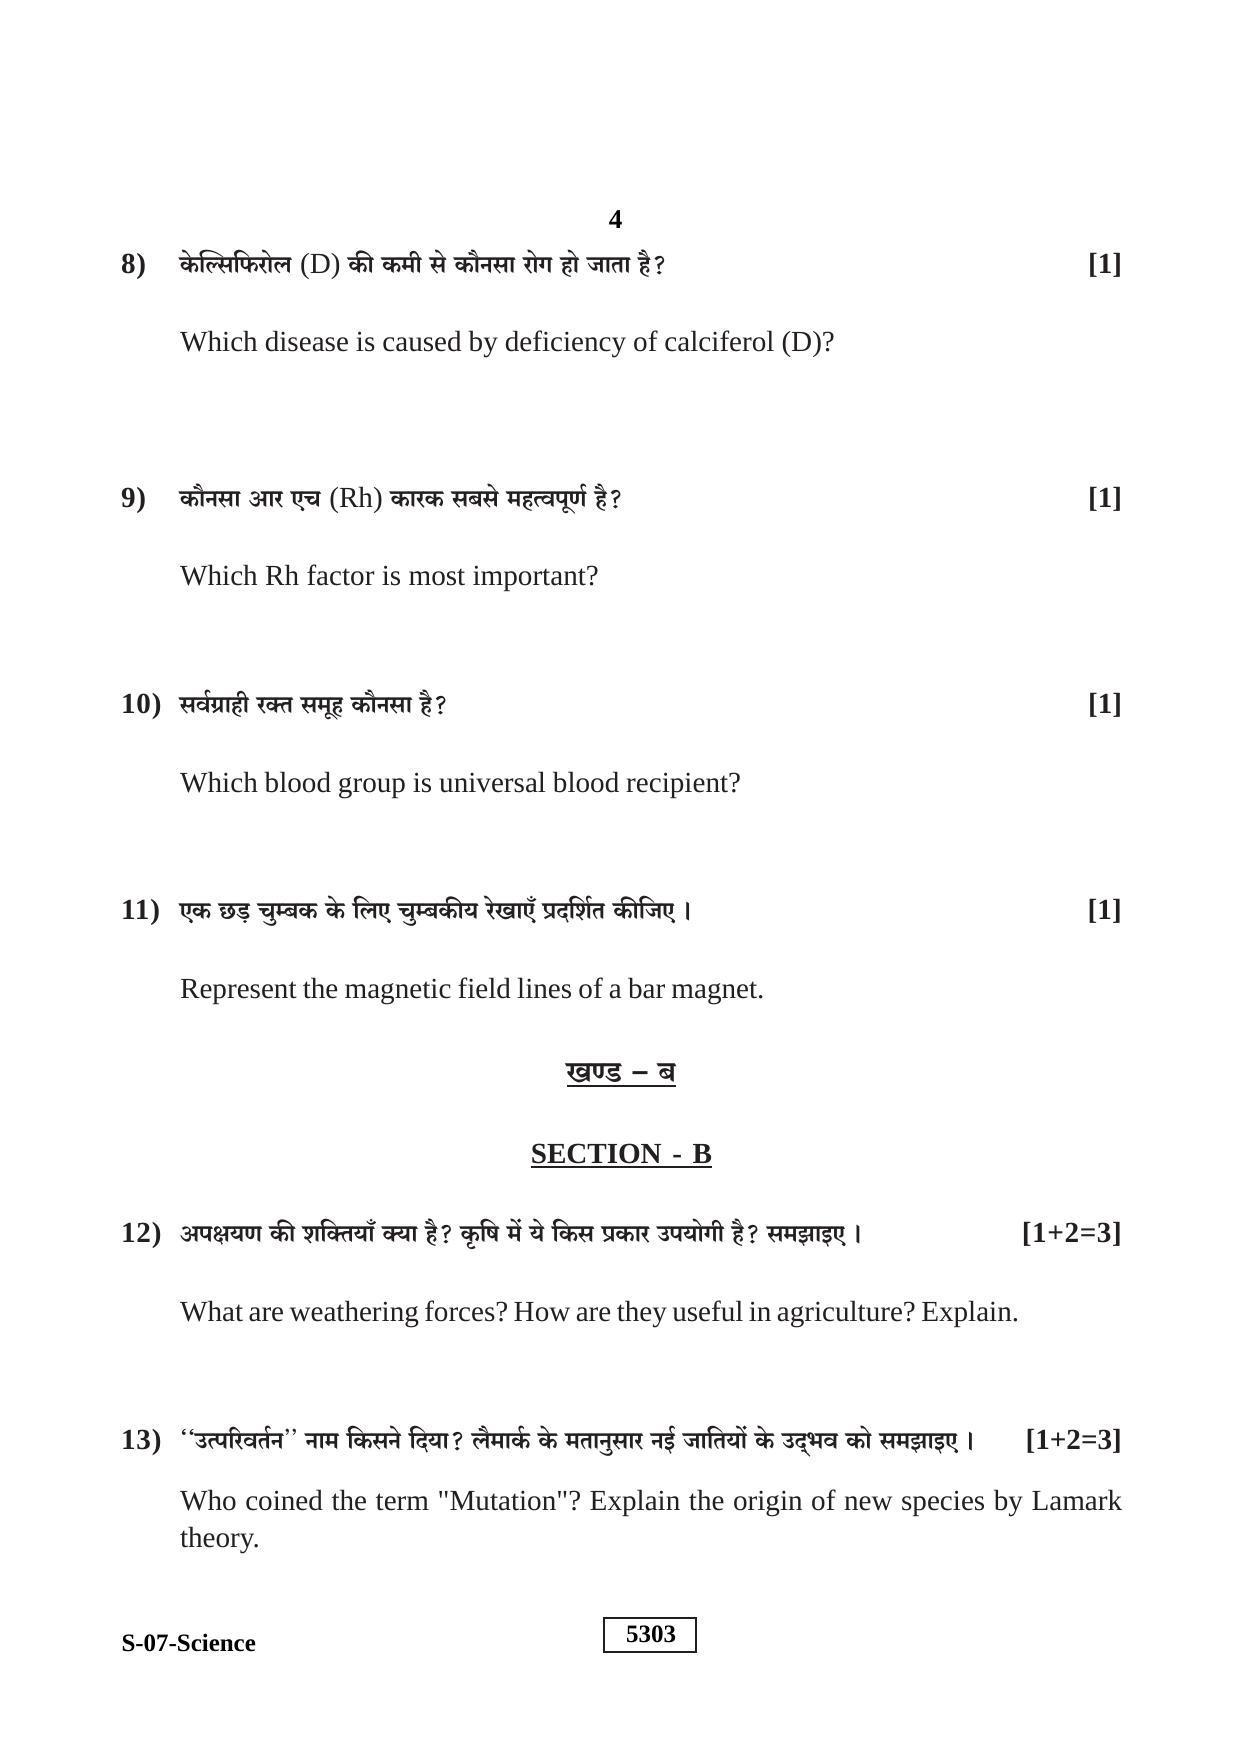 RBSE Class 10 Science 2020 Question Paper - Page 4